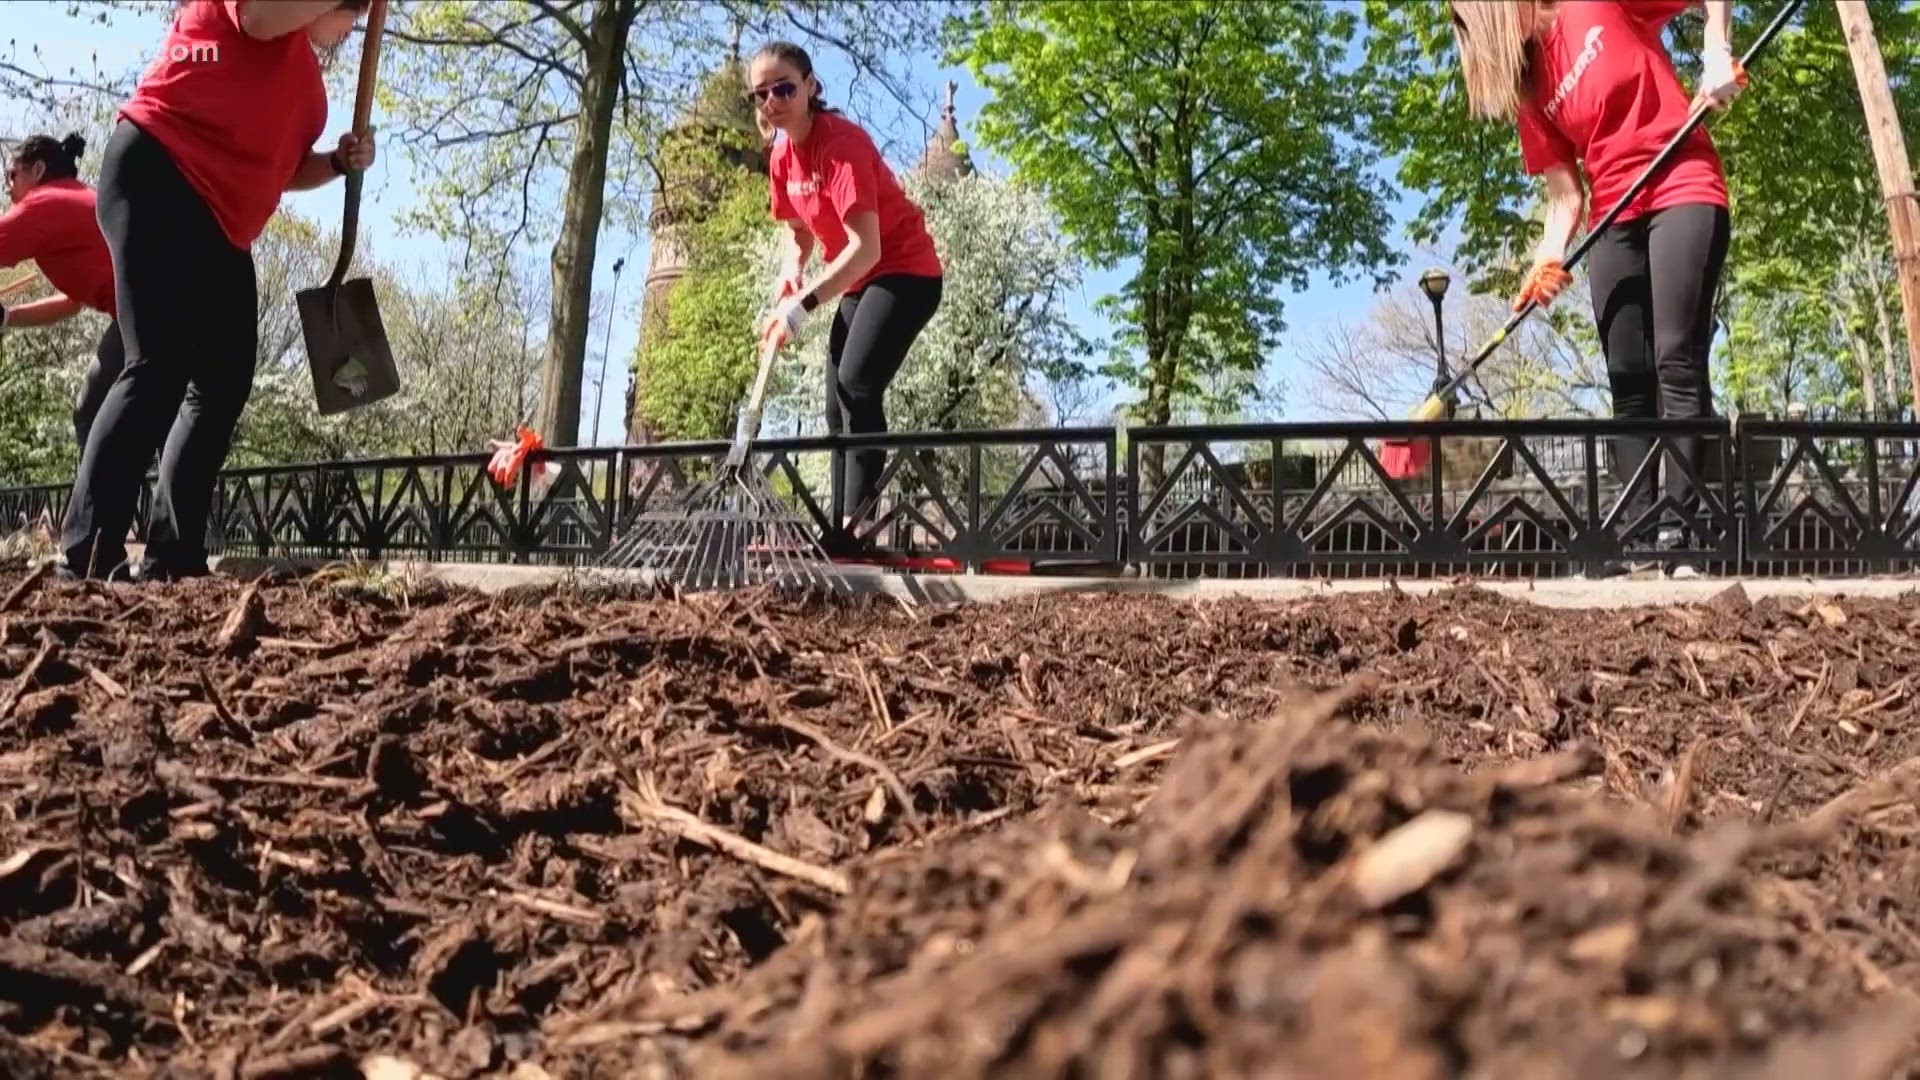 Travelers made a point to visit spots across Greater Hartford for Earth Day projects.